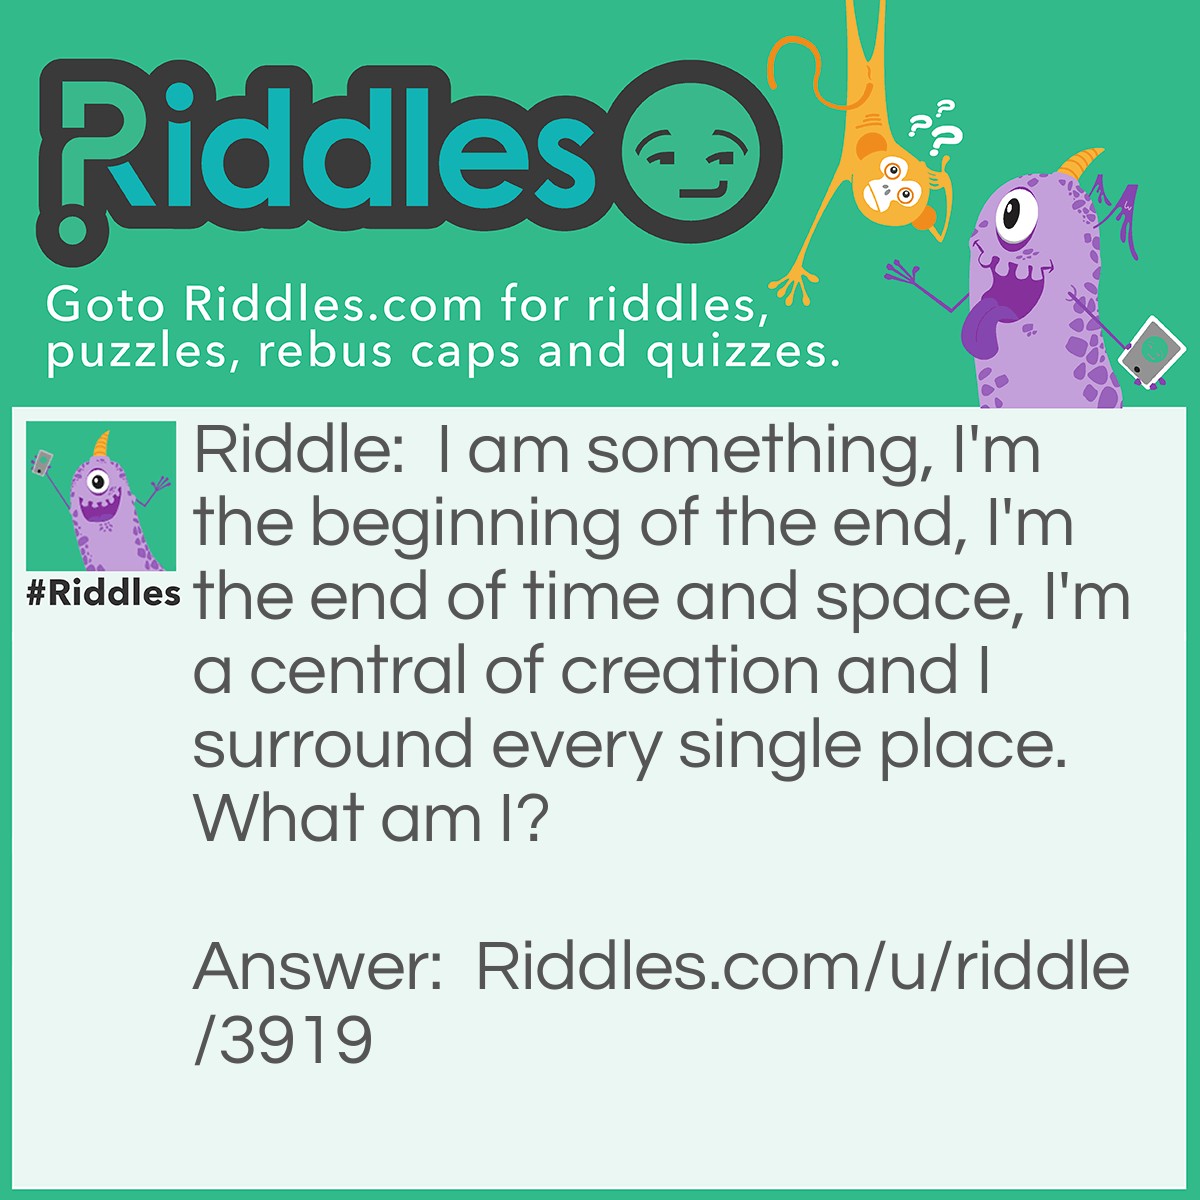 Riddle: I am something, I'm the beginning of the end, I'm the end of time and space, I'm a central of creation and I surround every single place. What am I? Answer: The letter E.